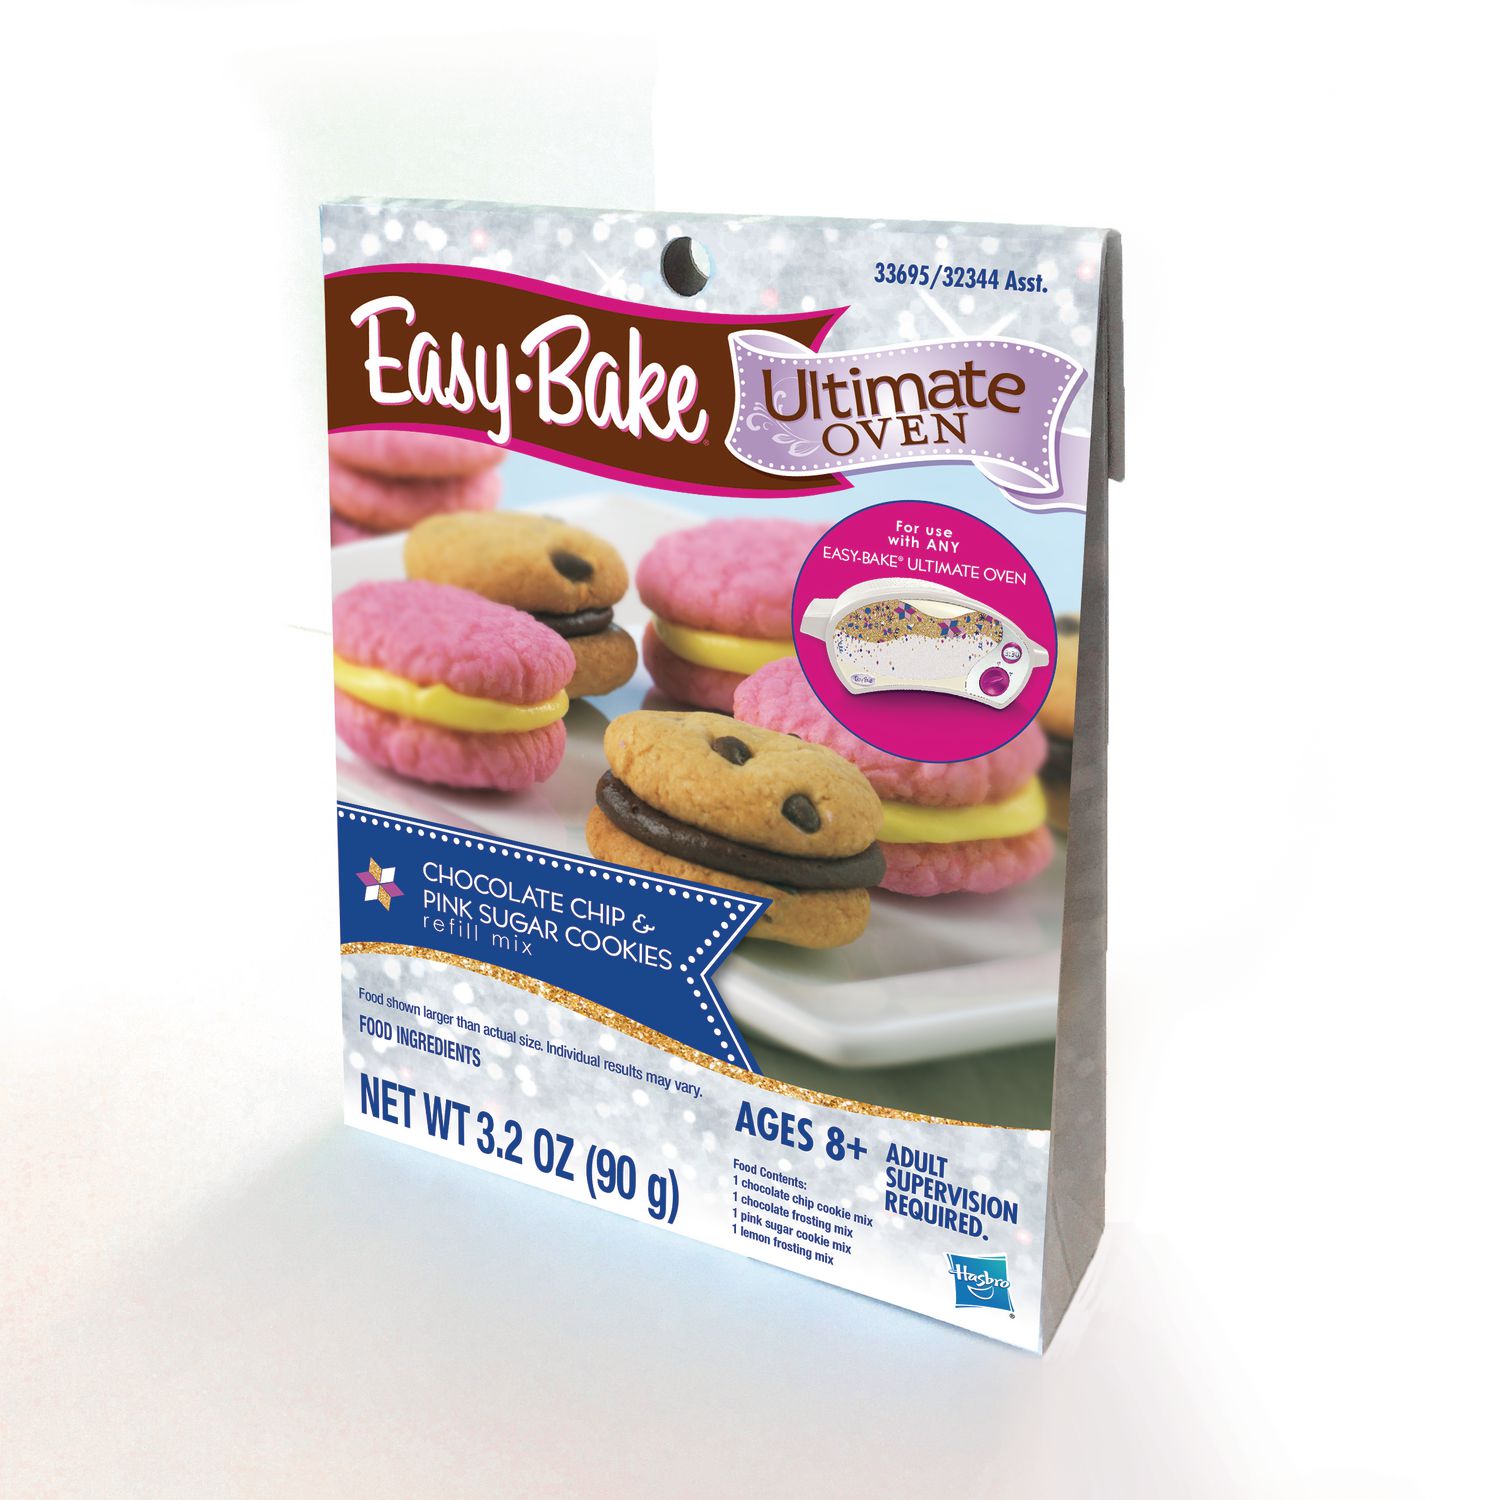 Easy-Bake Ultimate Oven Baking Star Edition with Cheese Pizza Refill Pack and Chocolate Chip and Pink Sugar Cookies Refill Pack 